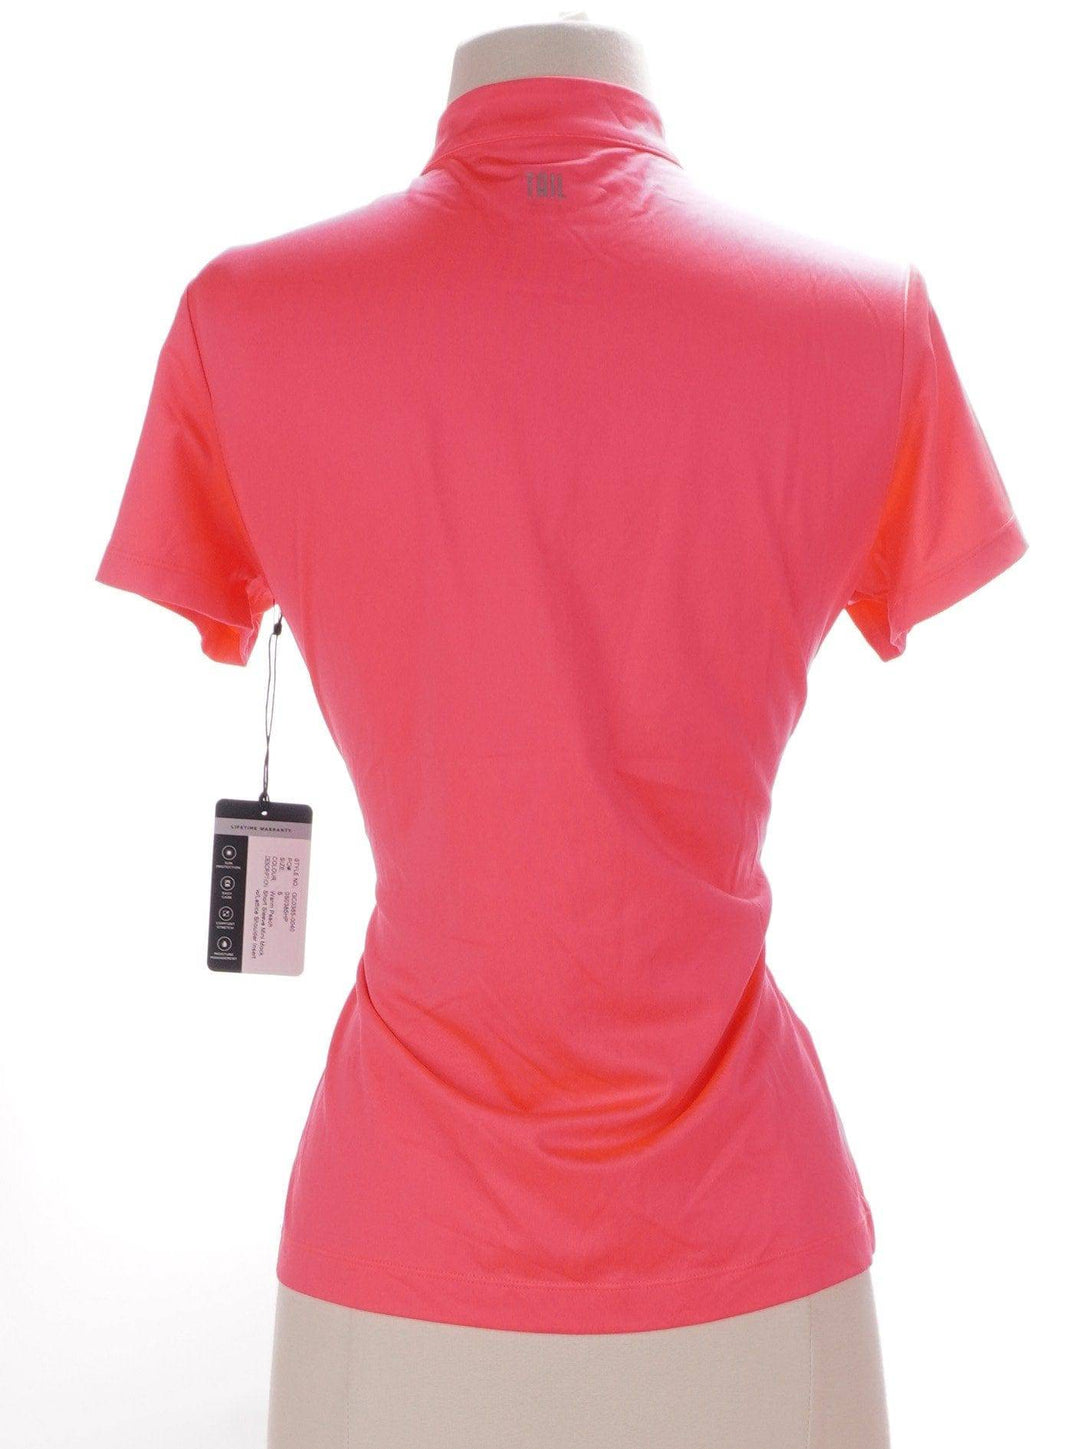 Tail Peach / Small Tail Short Sleeve Top - Warm Peach - Size Small